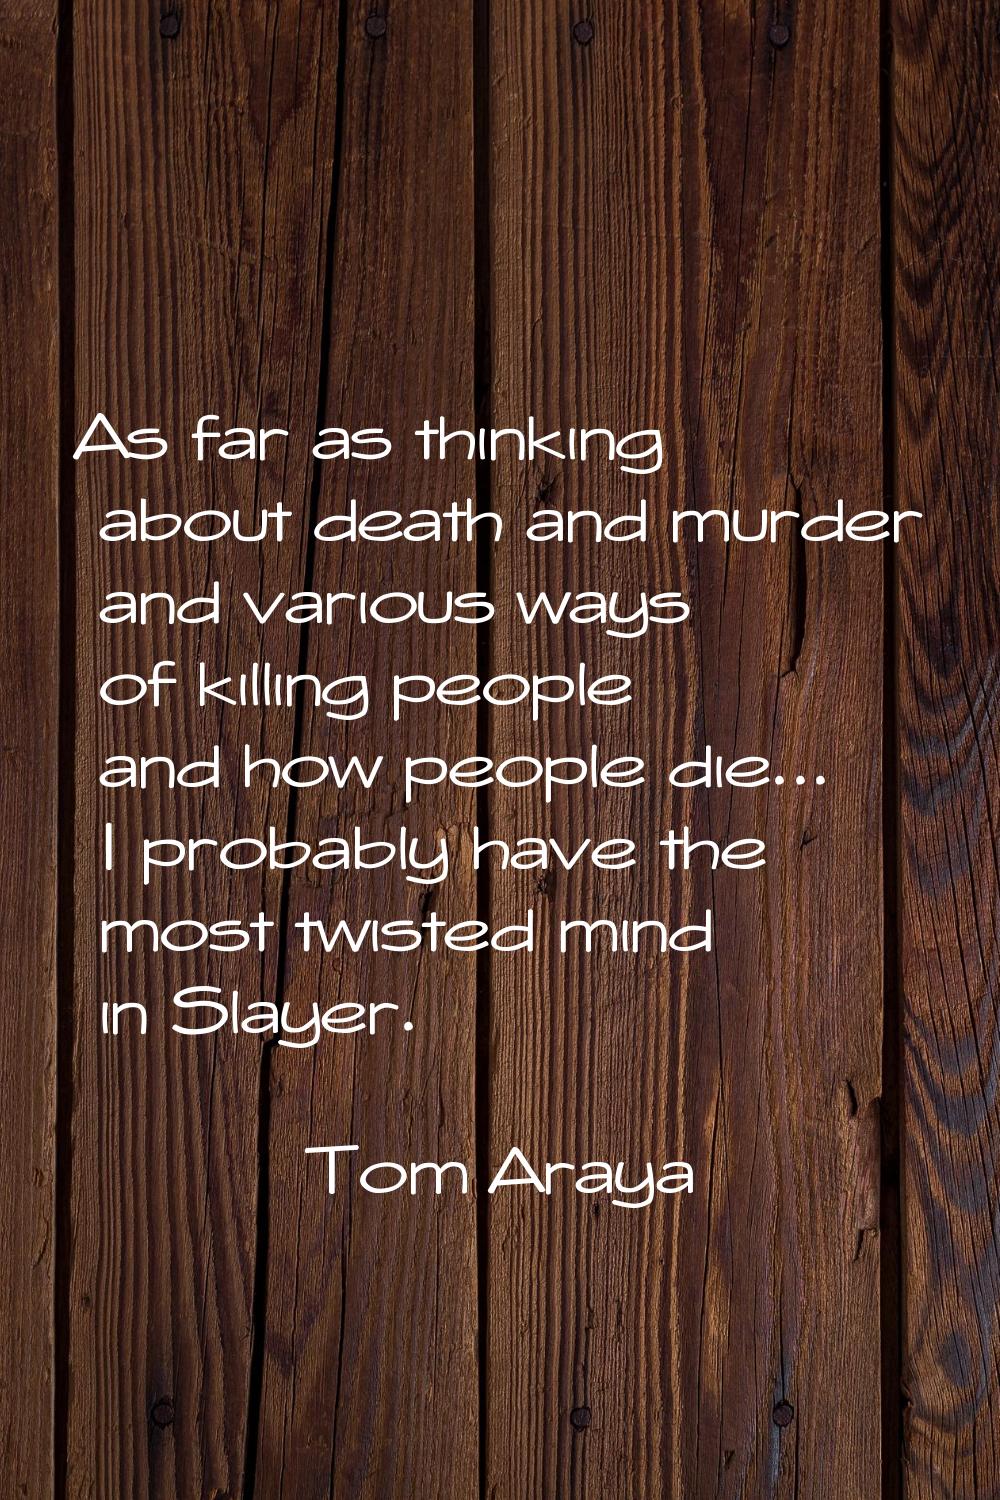 As far as thinking about death and murder and various ways of killing people and how people die... 